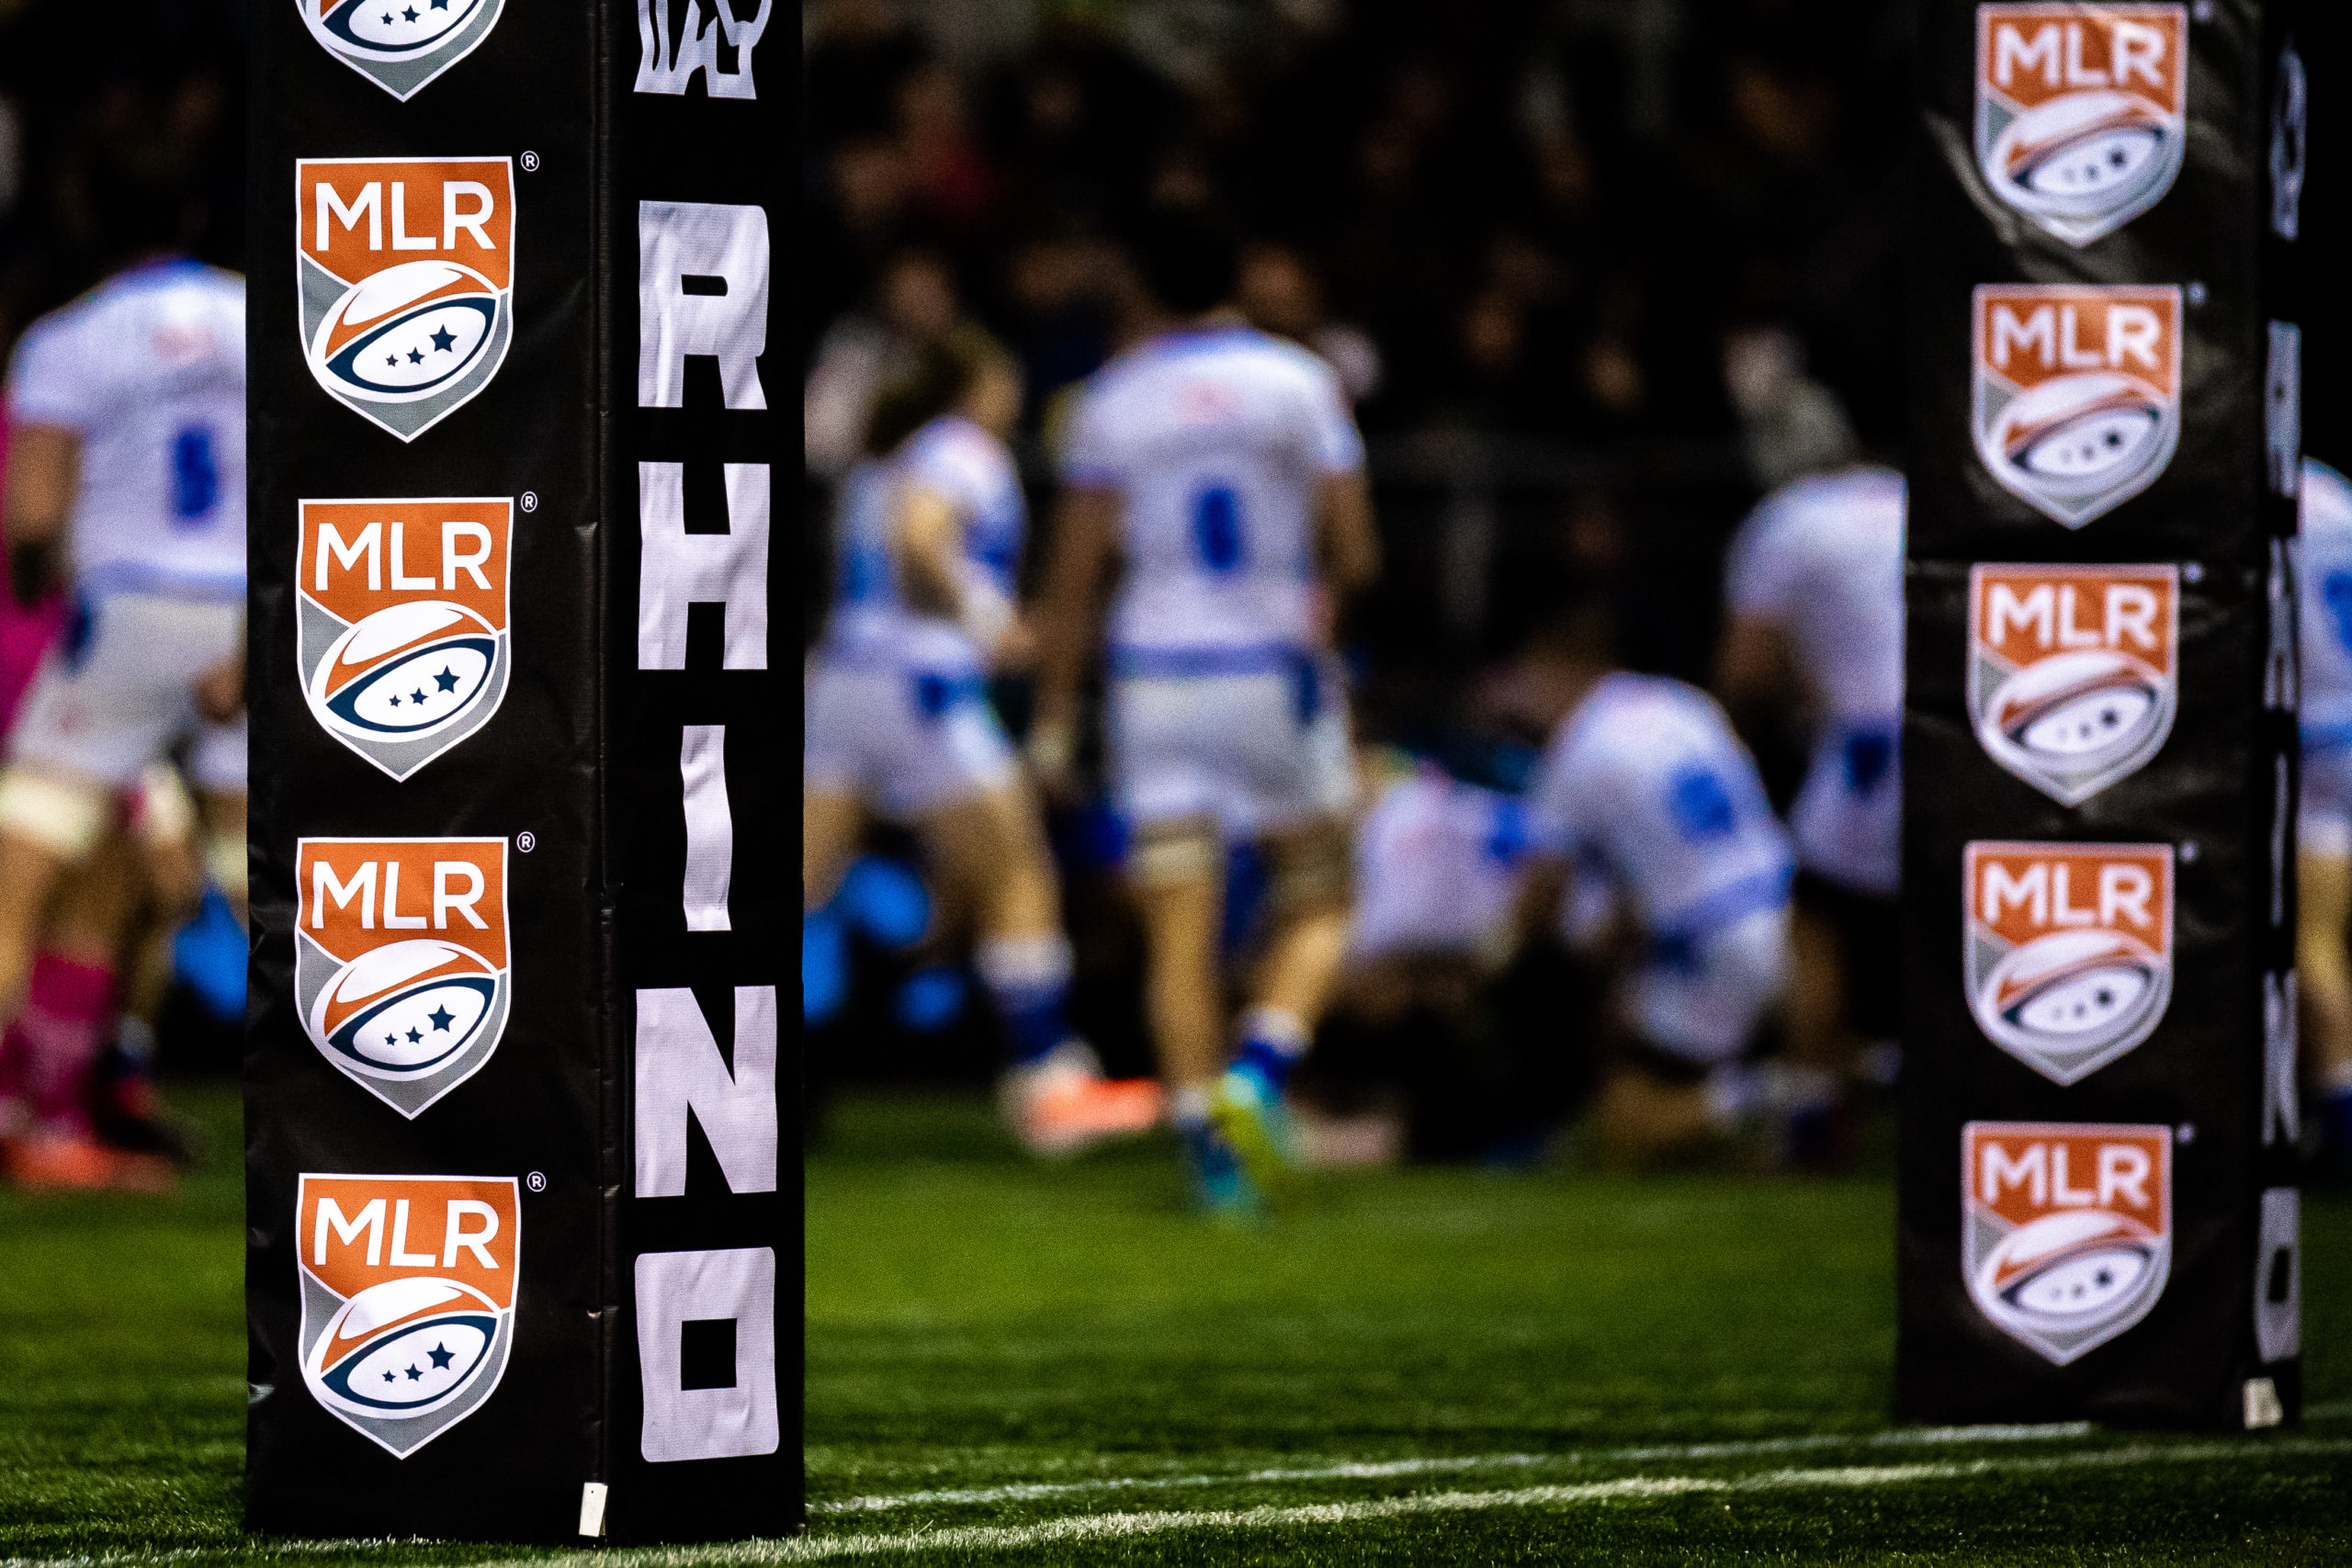 HOW TO WATCH: Toronto Arrows vs. Rugby ATL (Mar. 1, 2020)